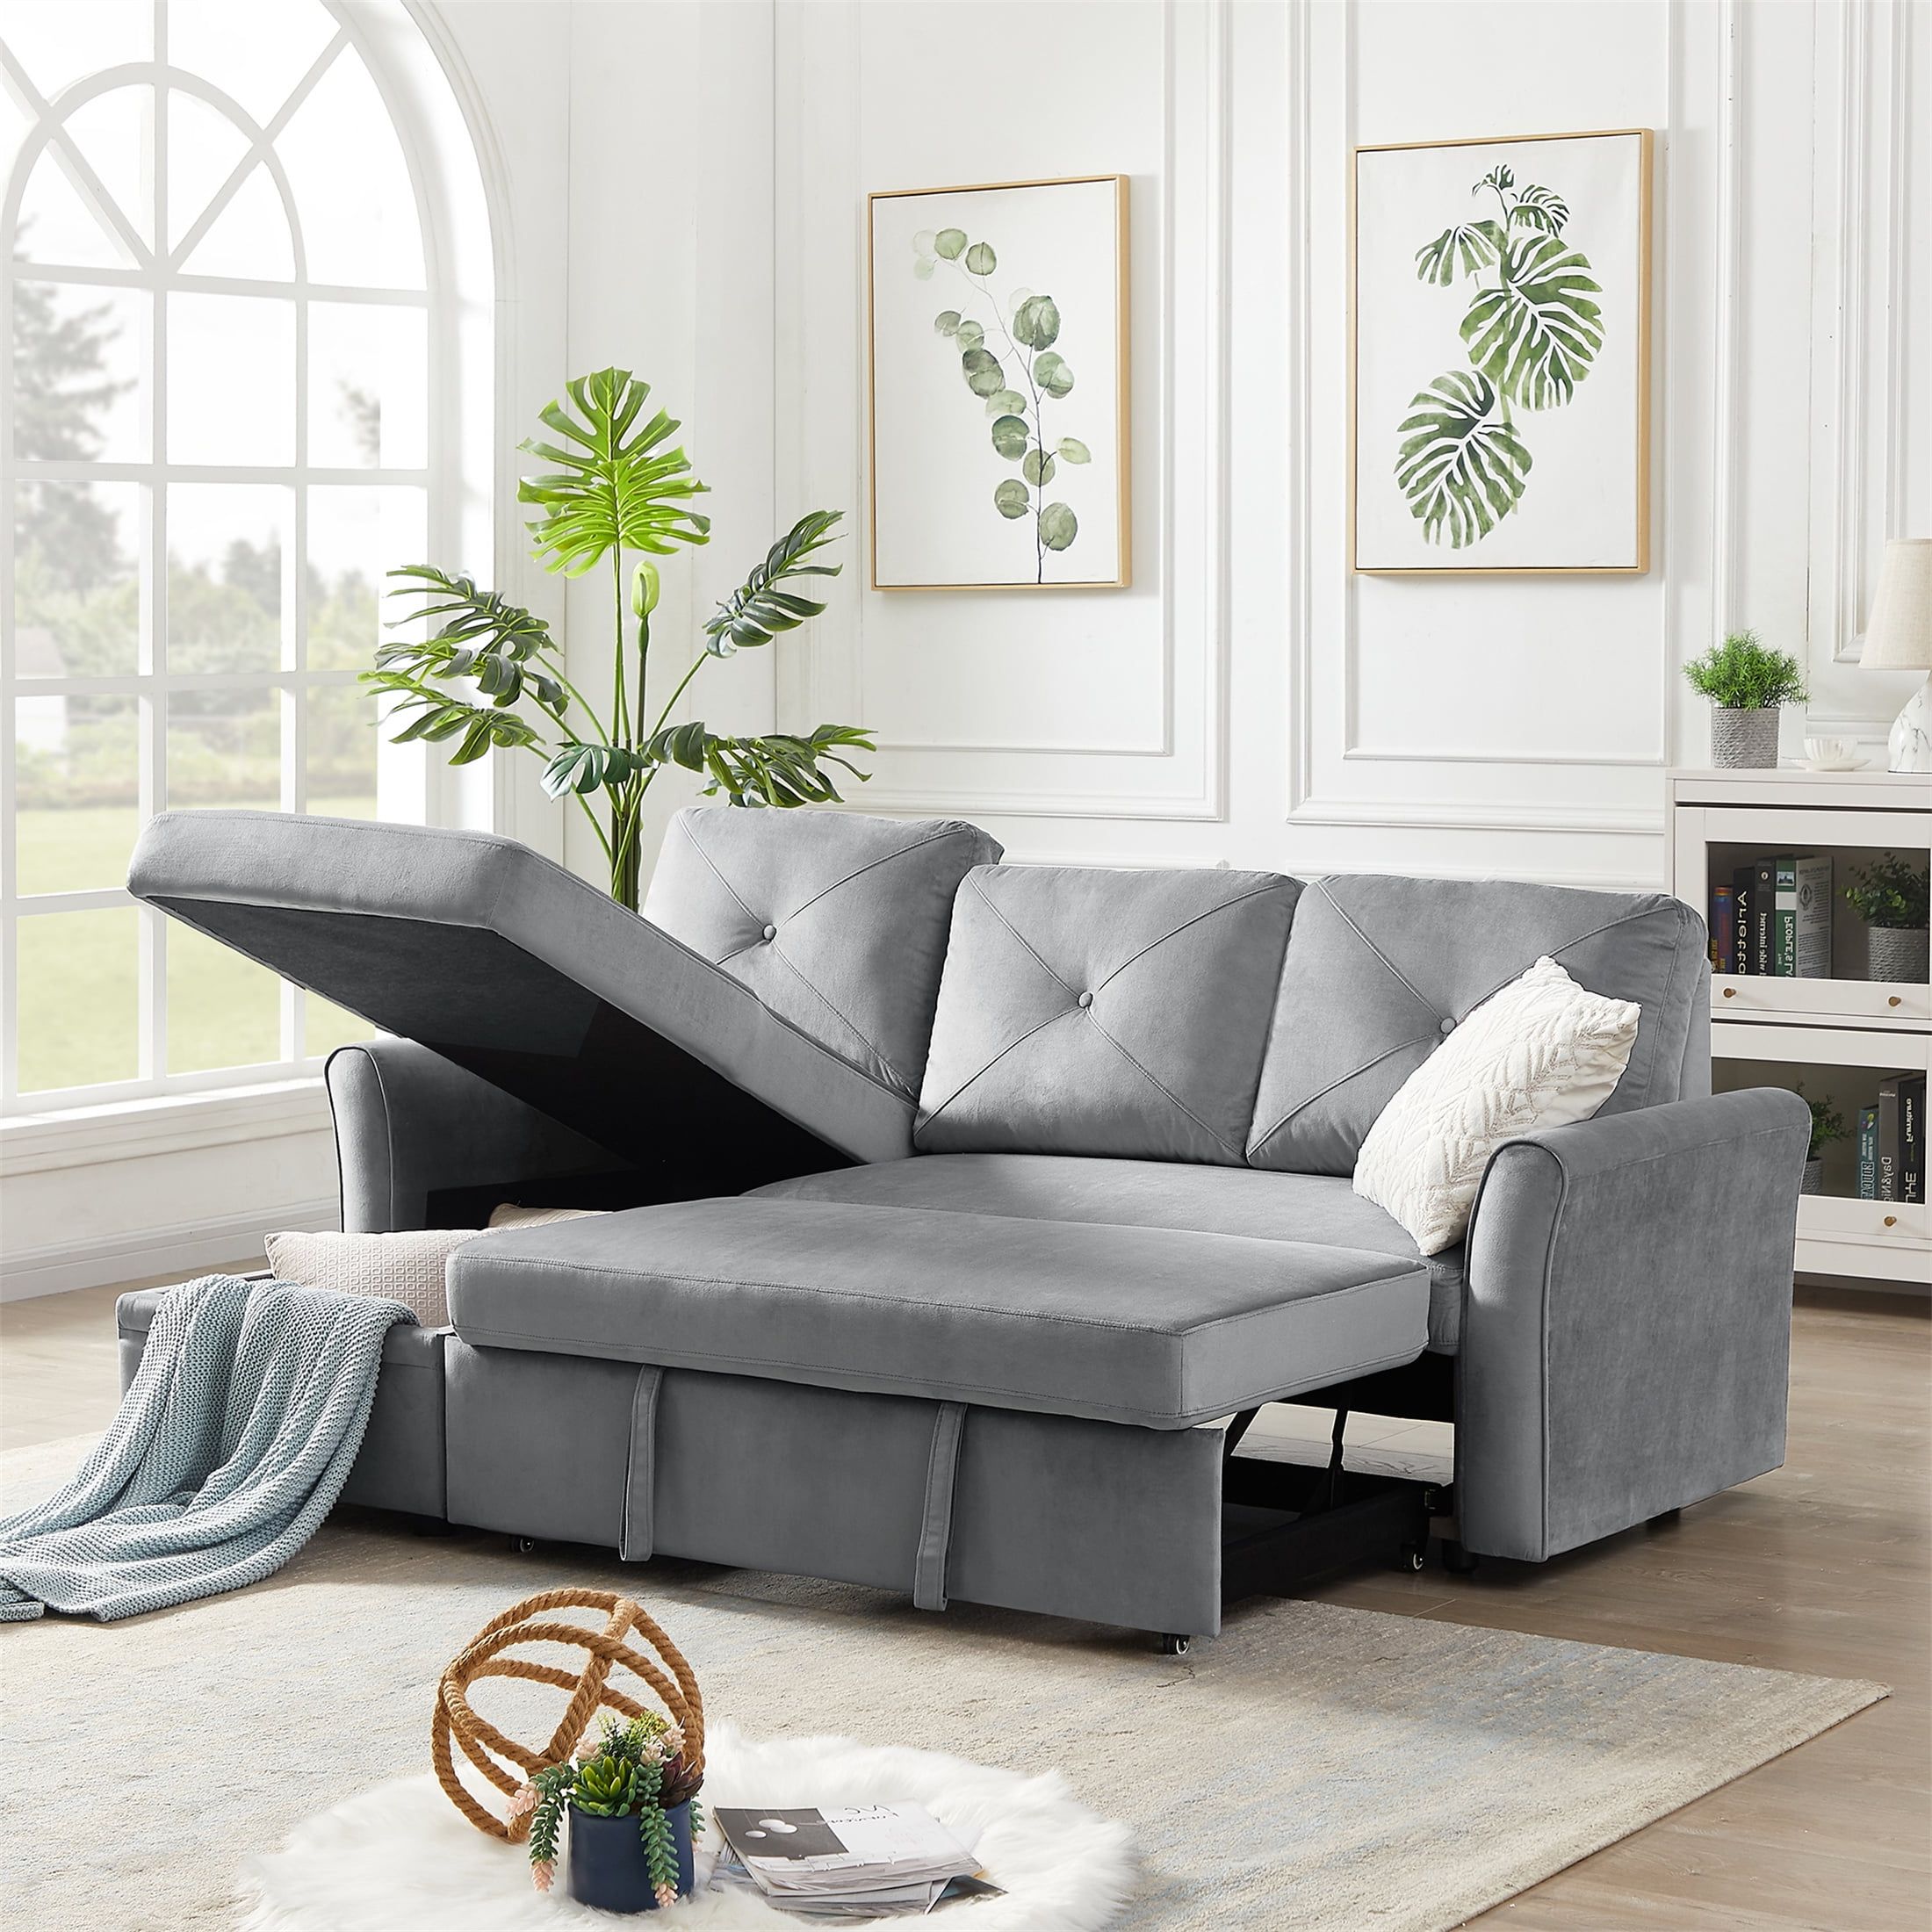 Aukfa Modern Velvet Sectional Sleeper Sofa  Pull Out Bed  Reversible In Modern Velvet Sofa Recliners With Storage (Gallery 2 of 20)